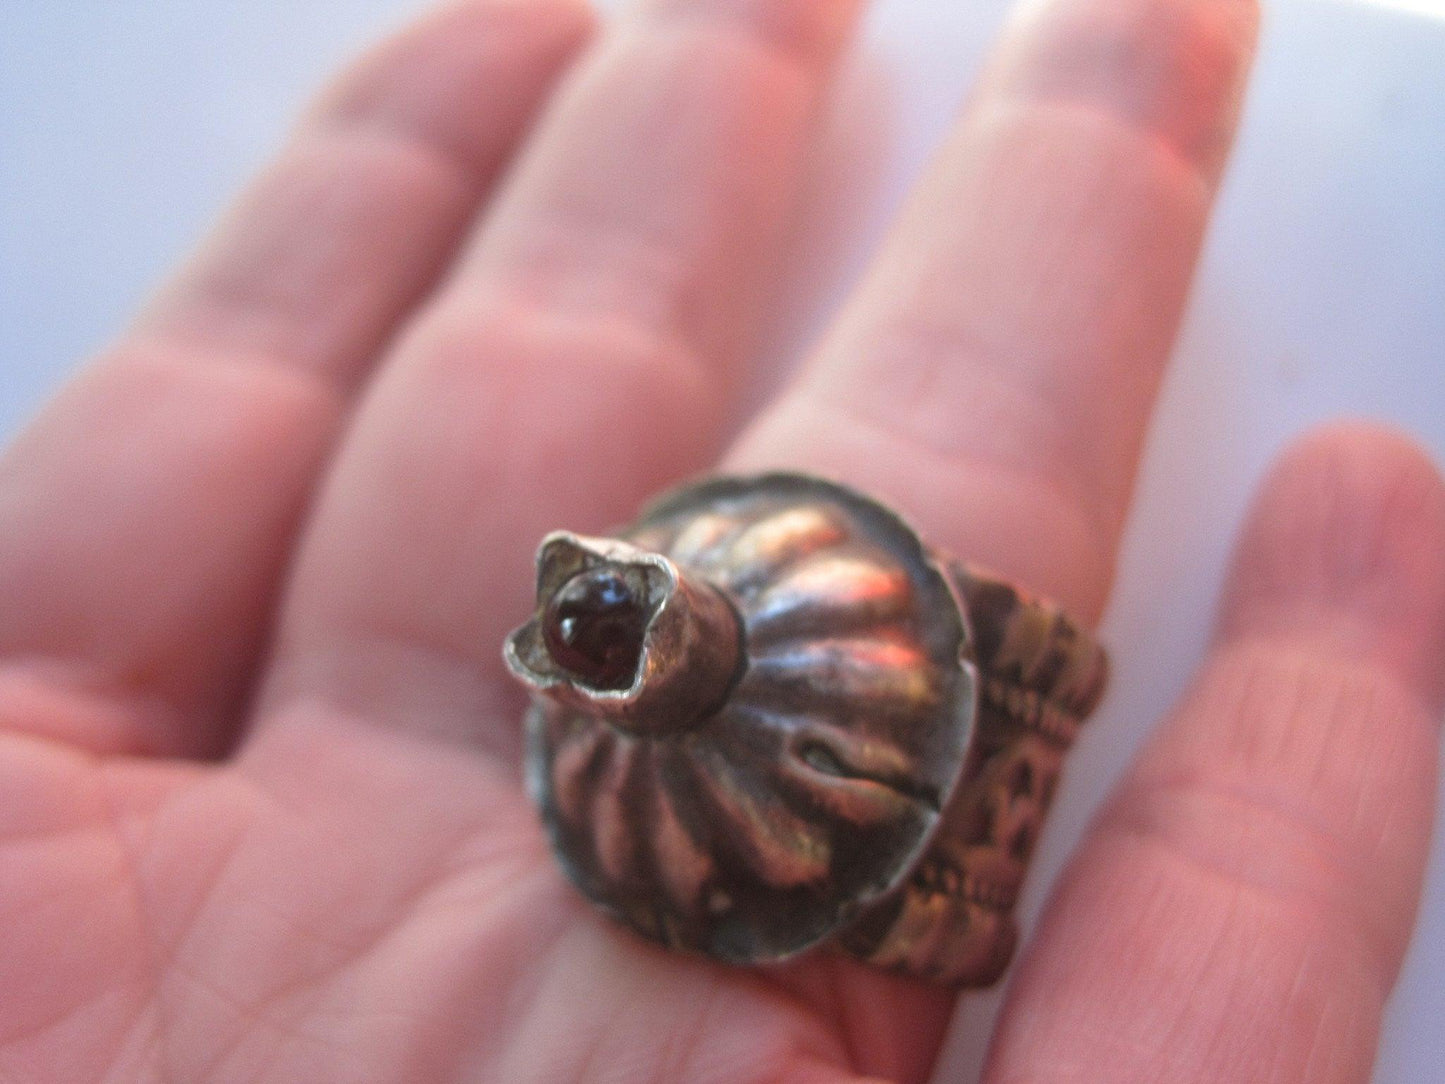 Vintage Silver Tower Ring with Red Glass, Size 9 from the Middle East - Anteeka